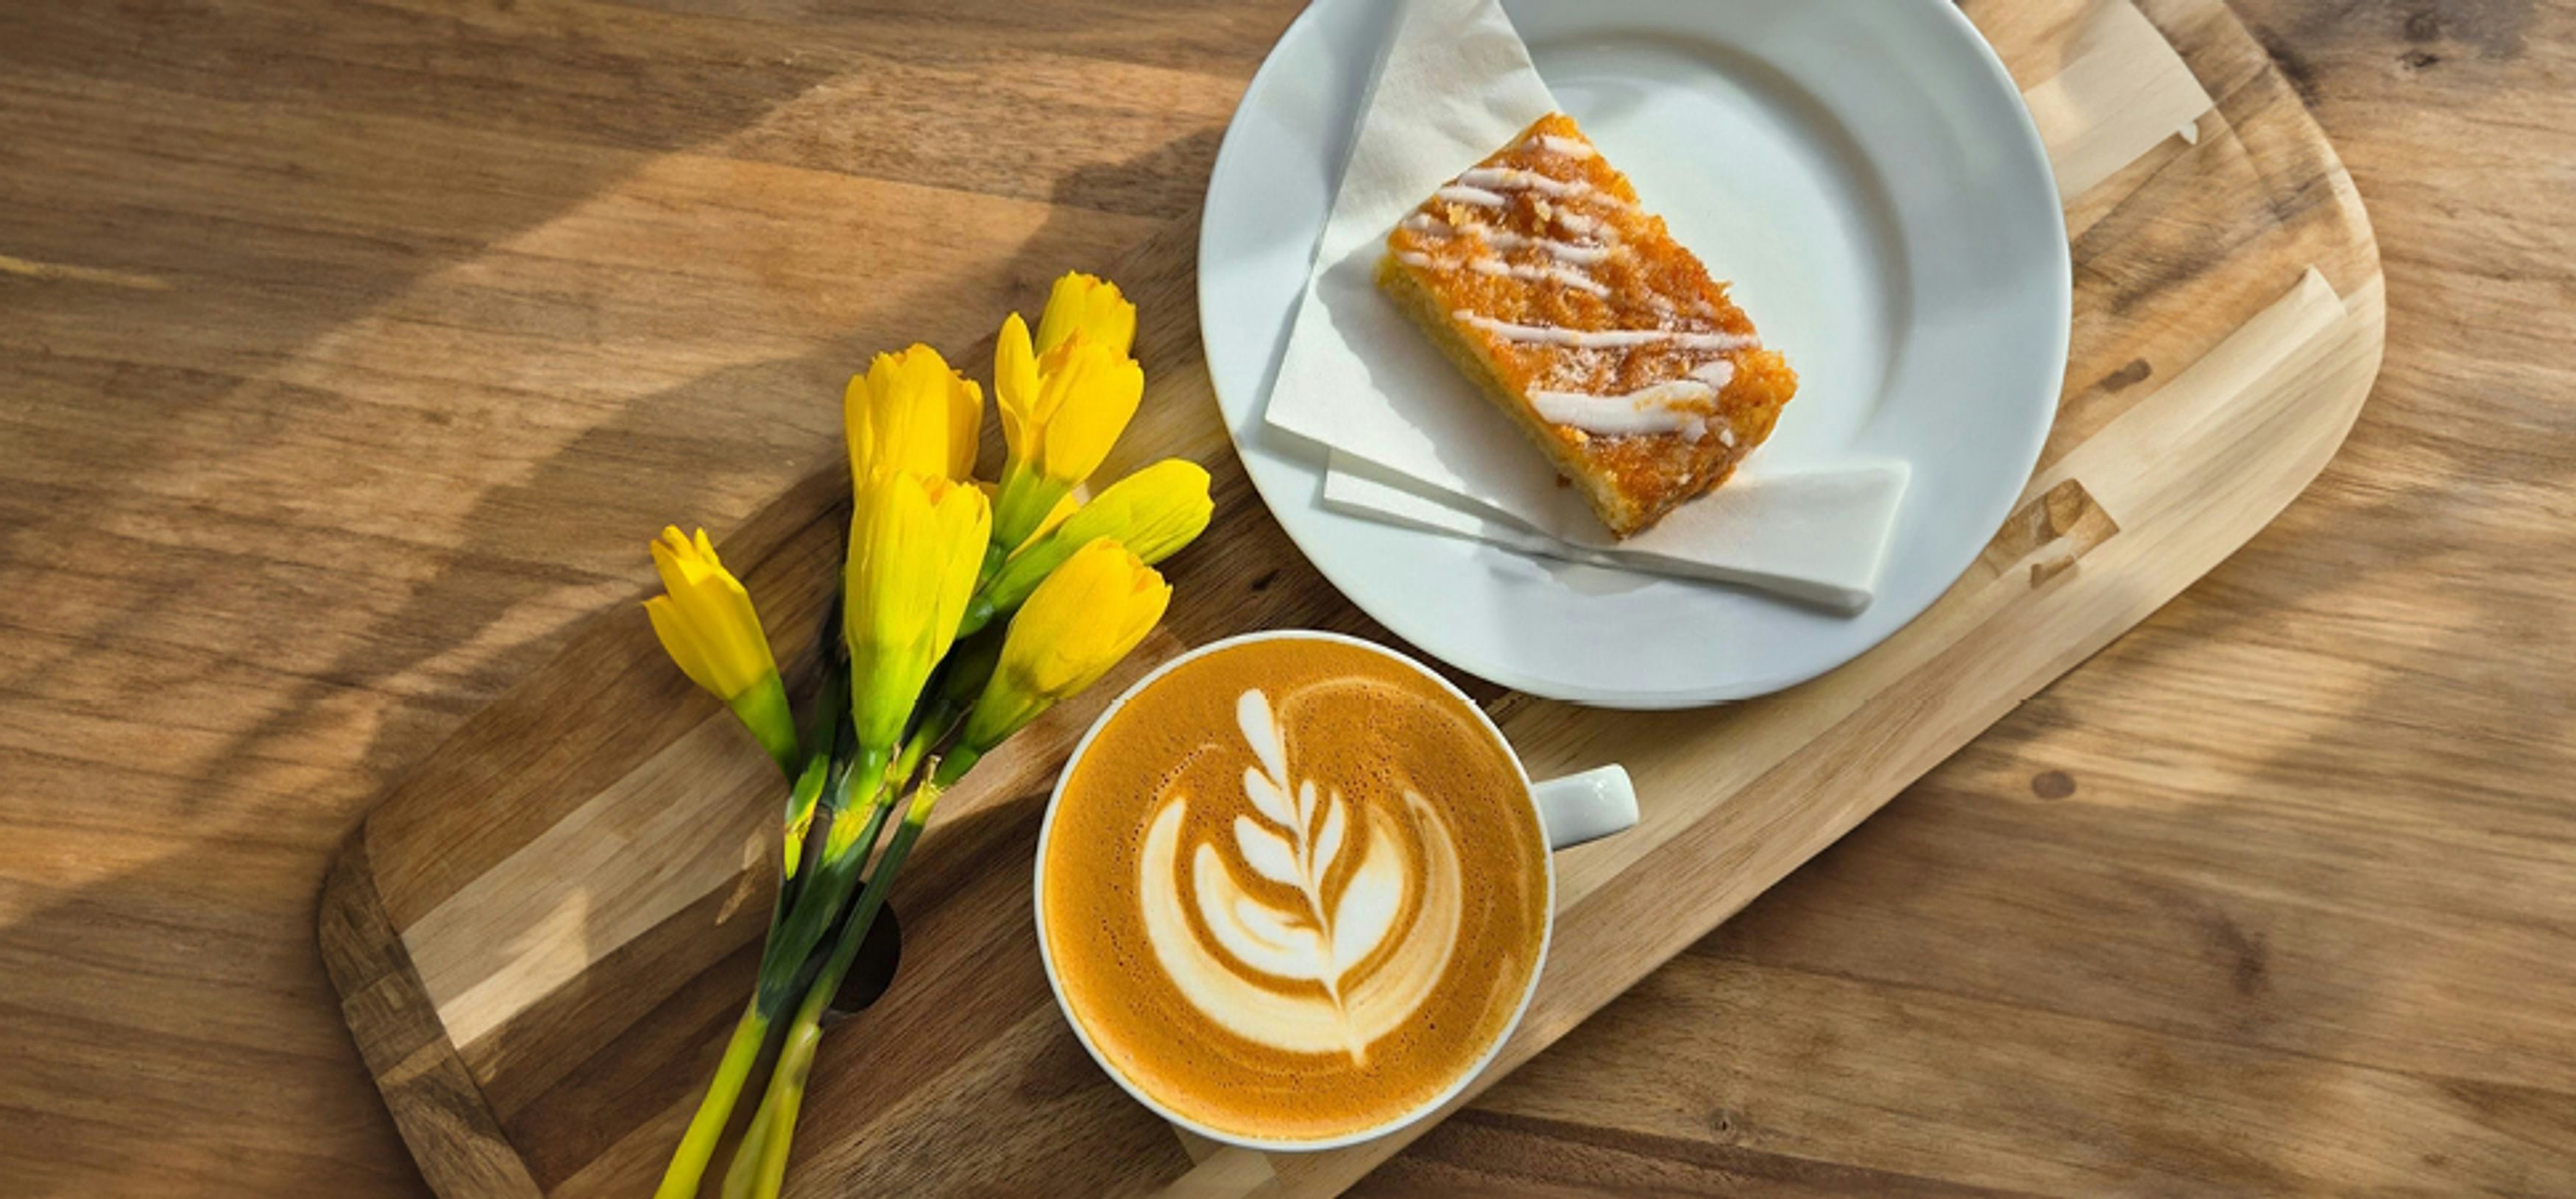 A cup of coffee with a leaf design in foam on a wooden table, alongside a piece of cake and yellow tulips.